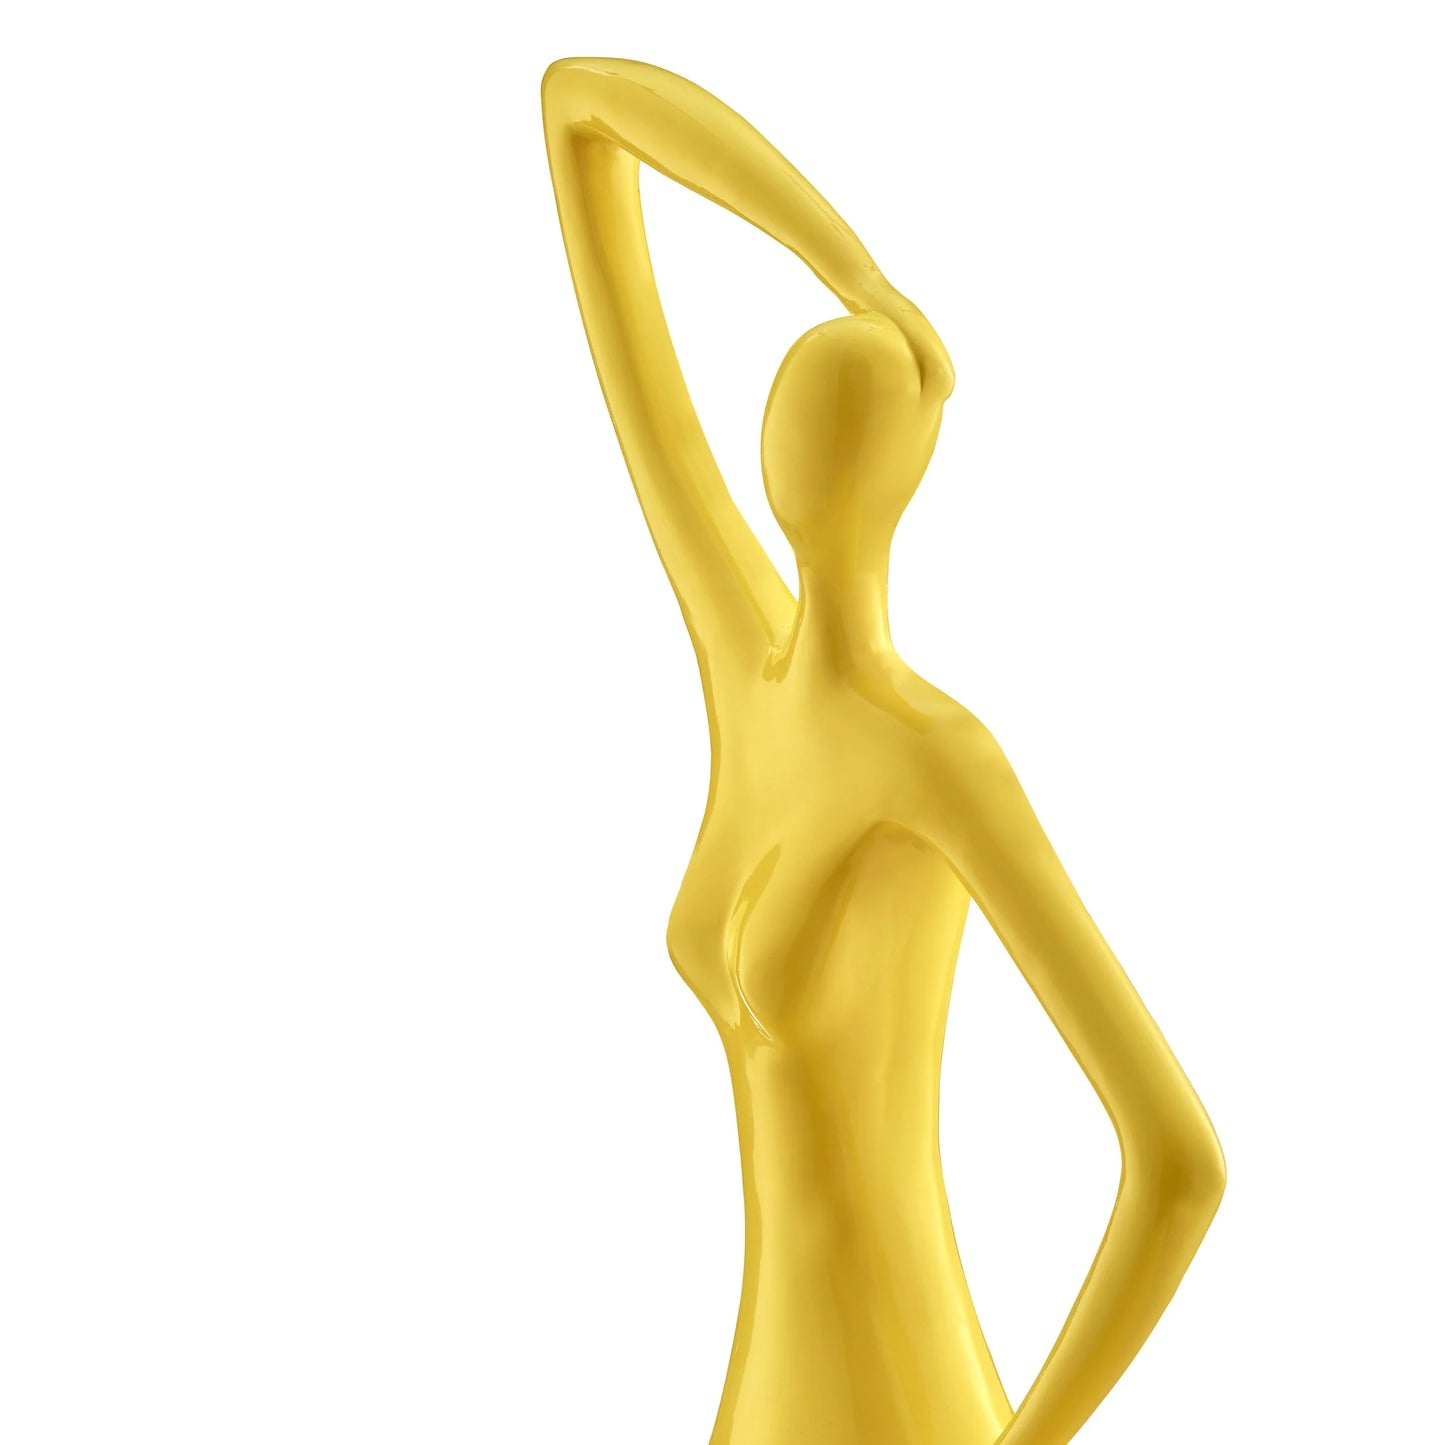 Finesse Decor Modern Diana Sculpture in Glossy Yellow - Large 3